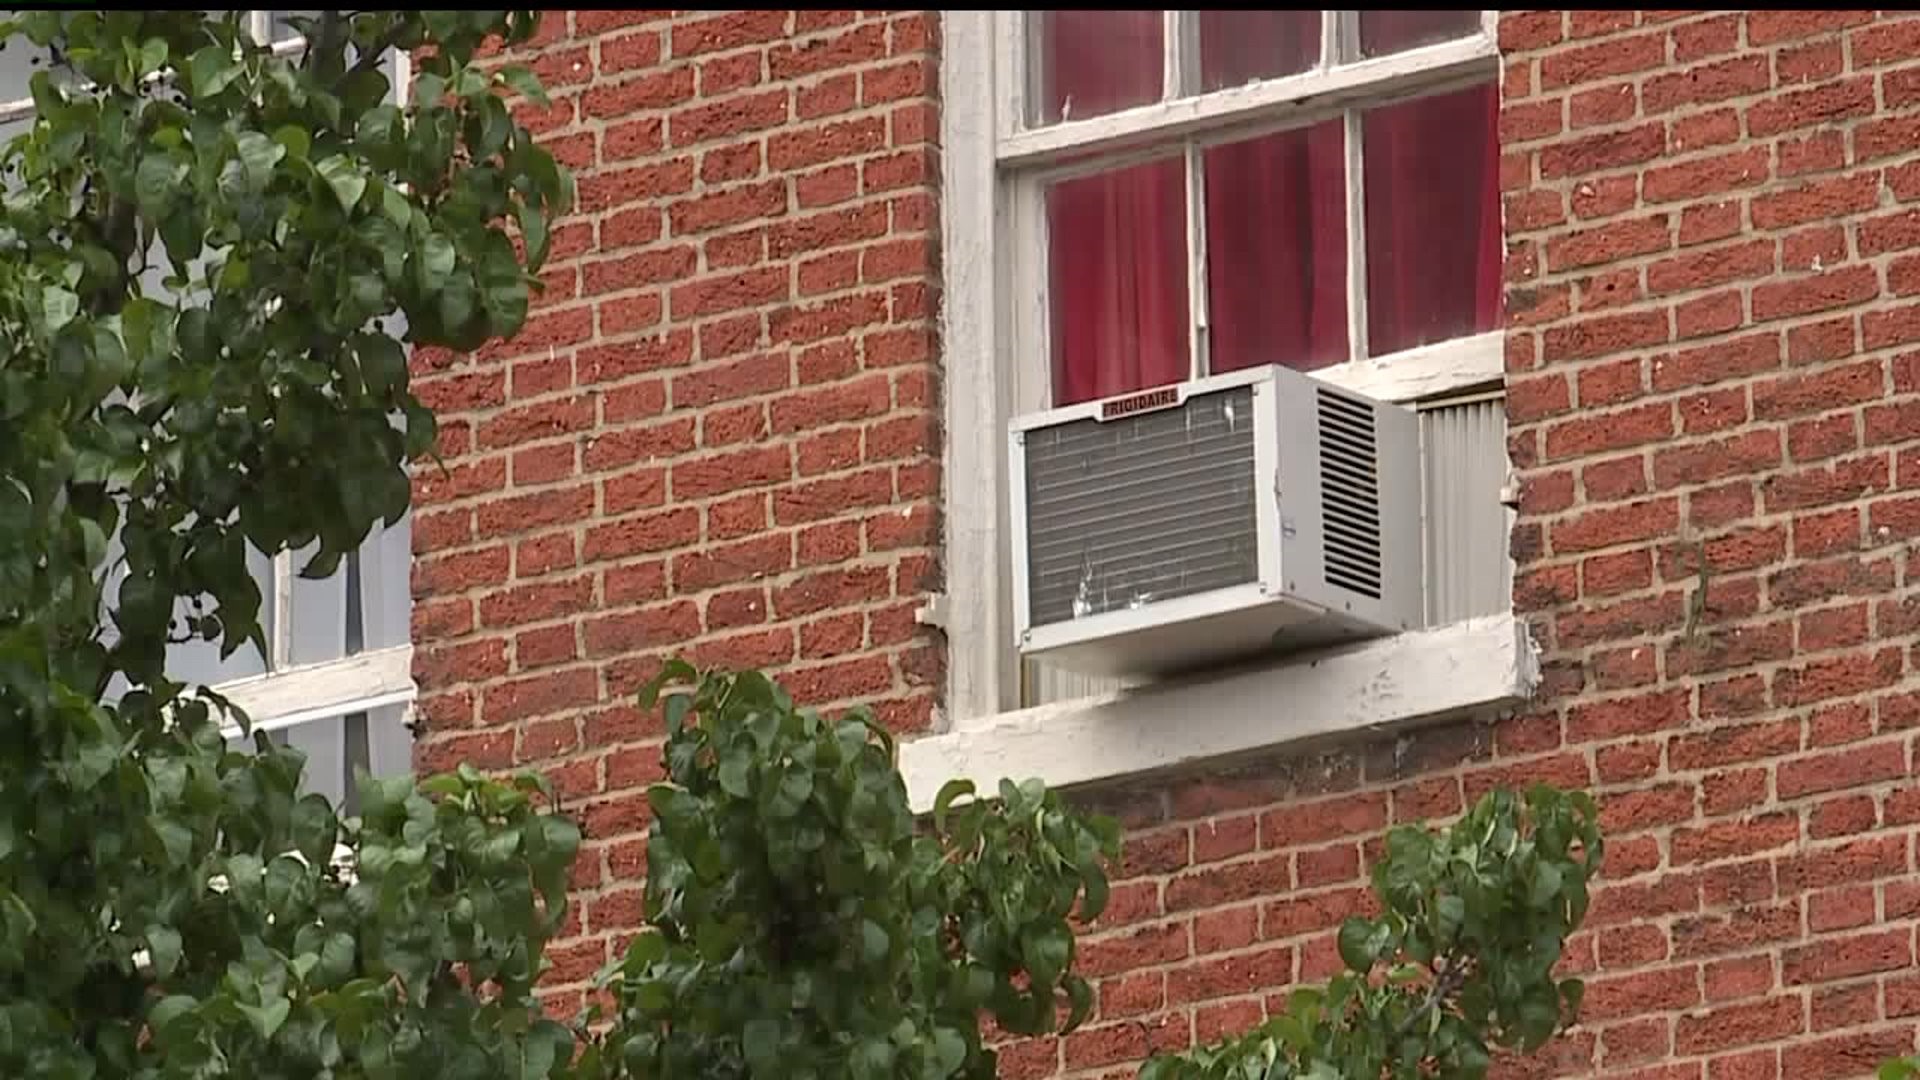 York County officials call for help publicizing cooling stations for hot weekend